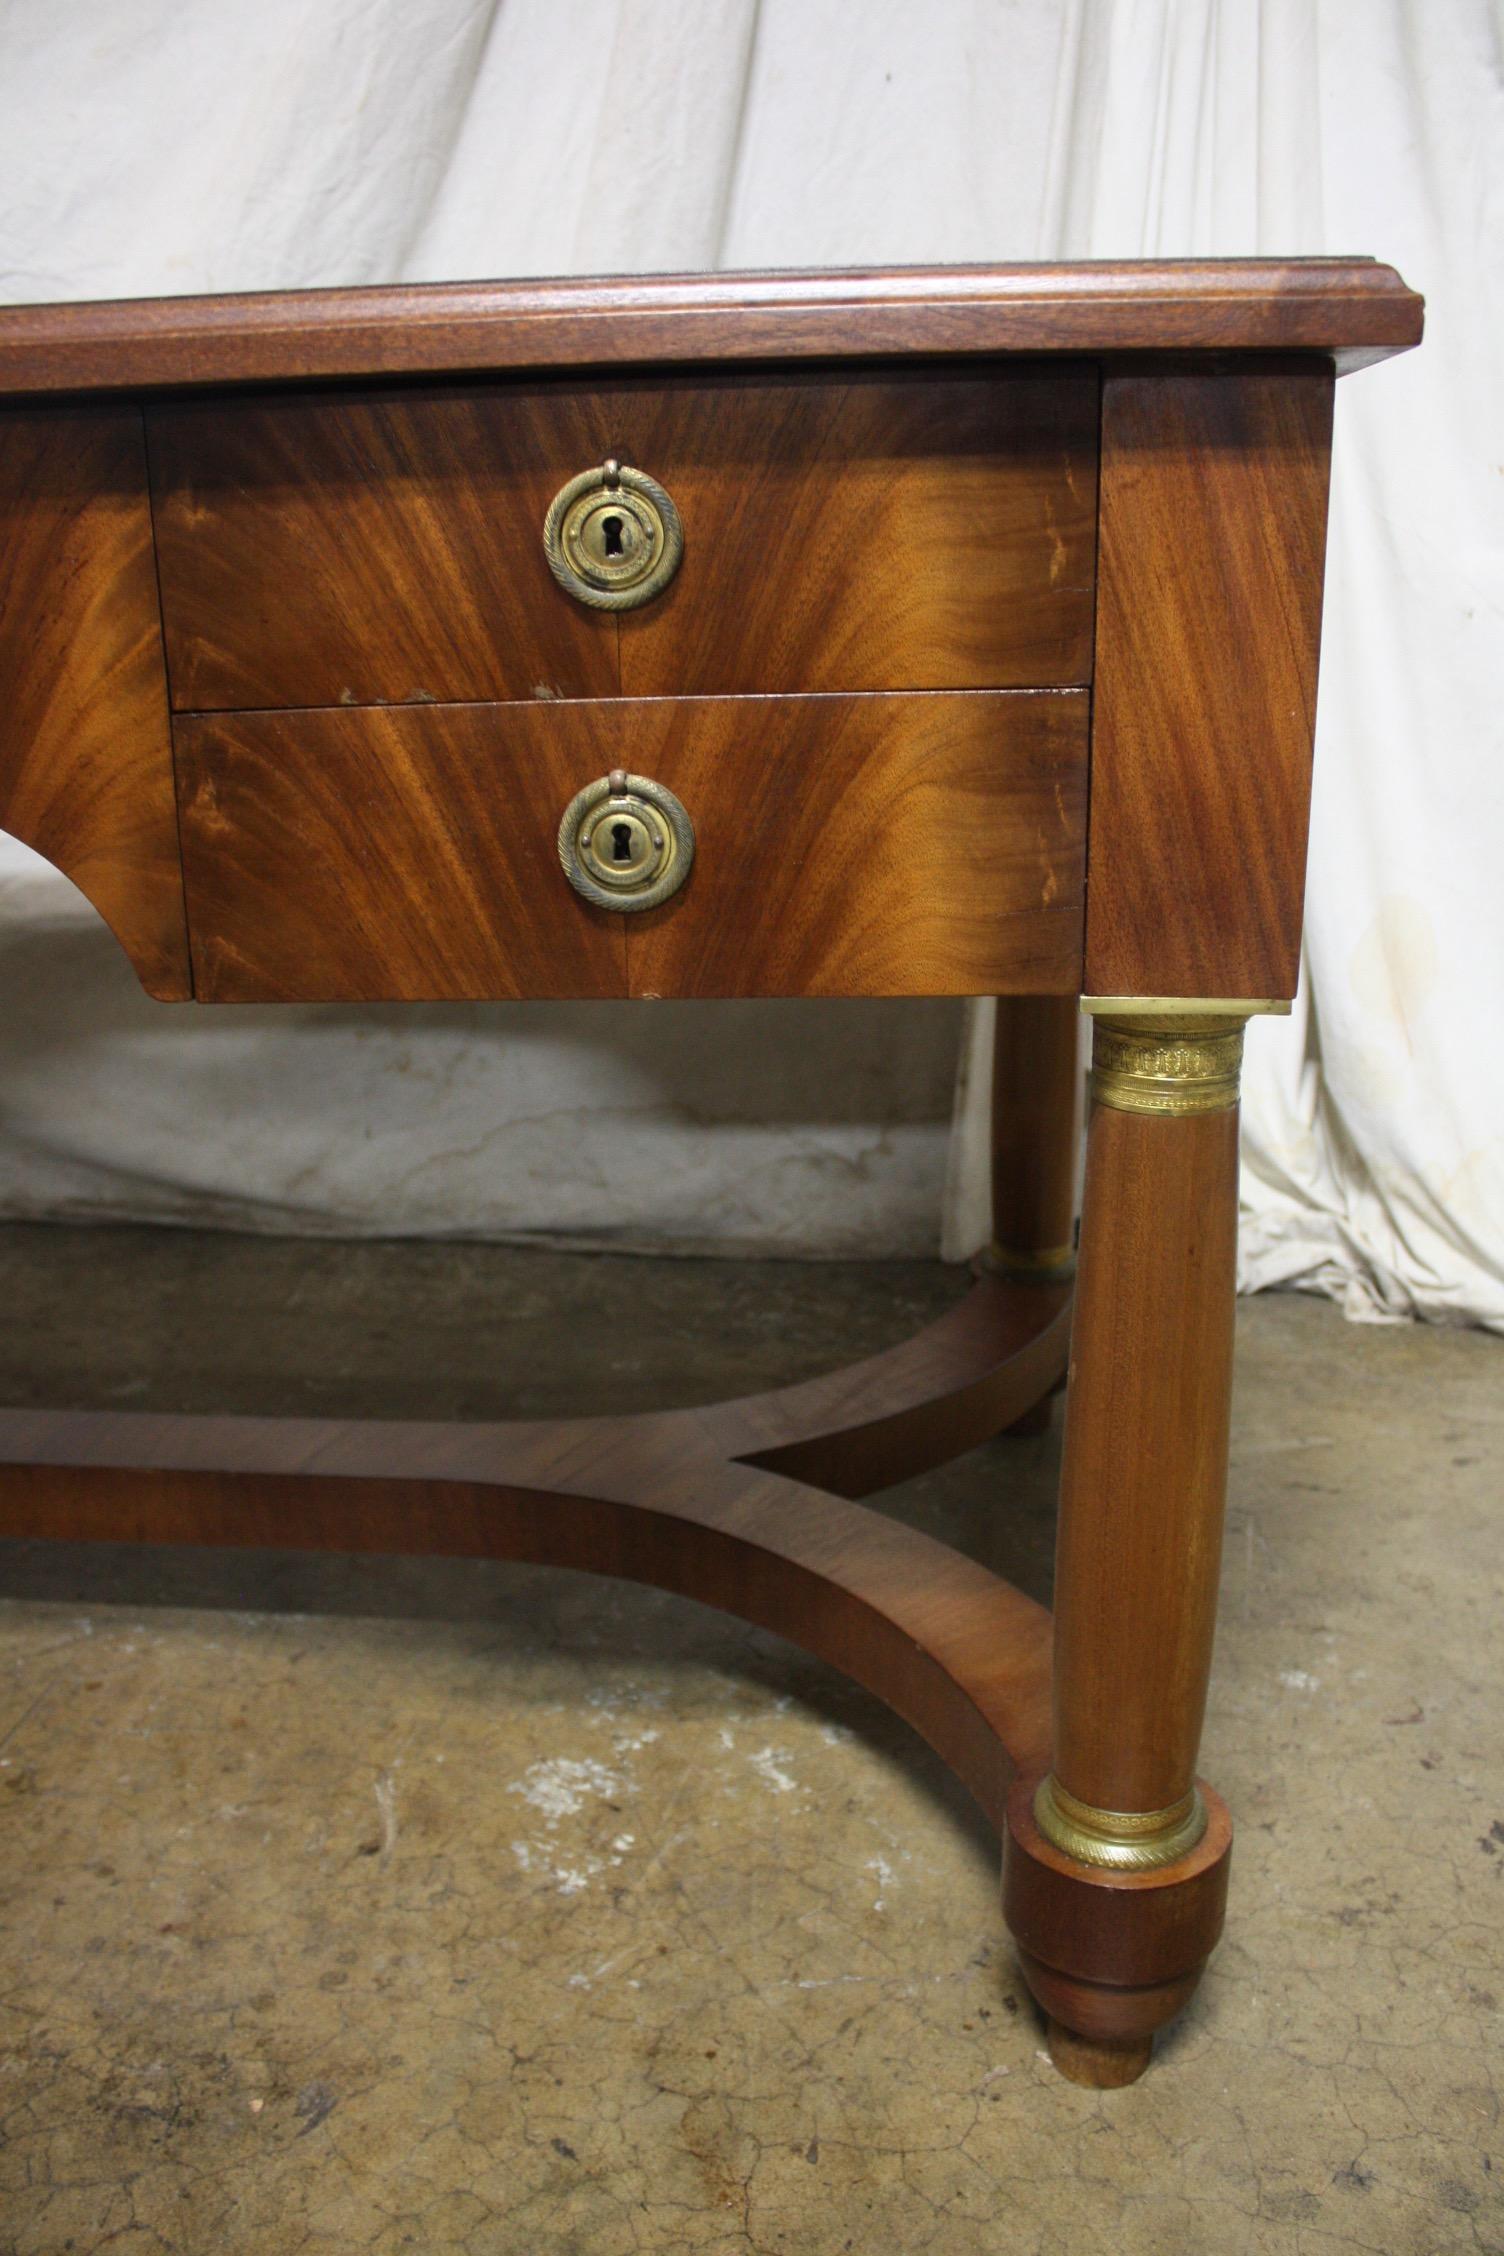 Early 20th century French Empire desk, with 2 extensions on each side. Each extension is 13in.W.
    